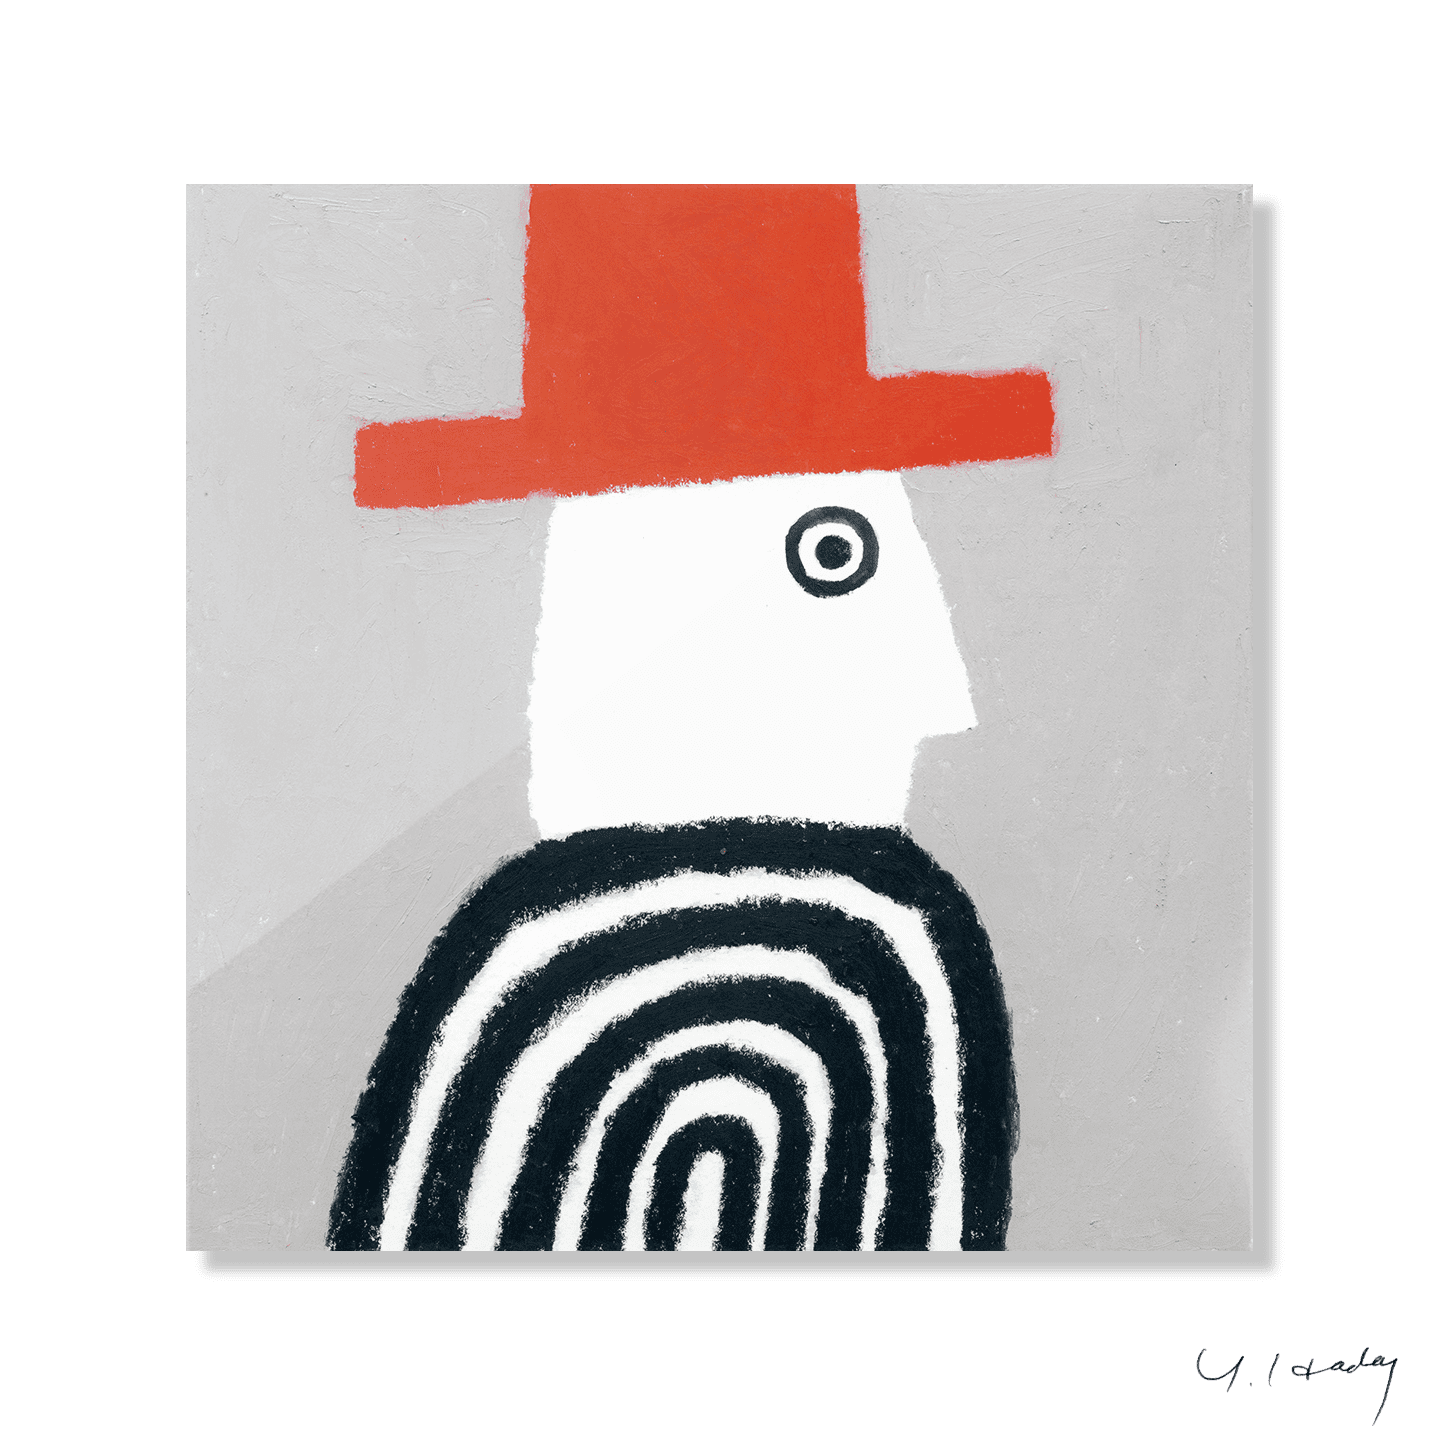 A Man with Red Hat